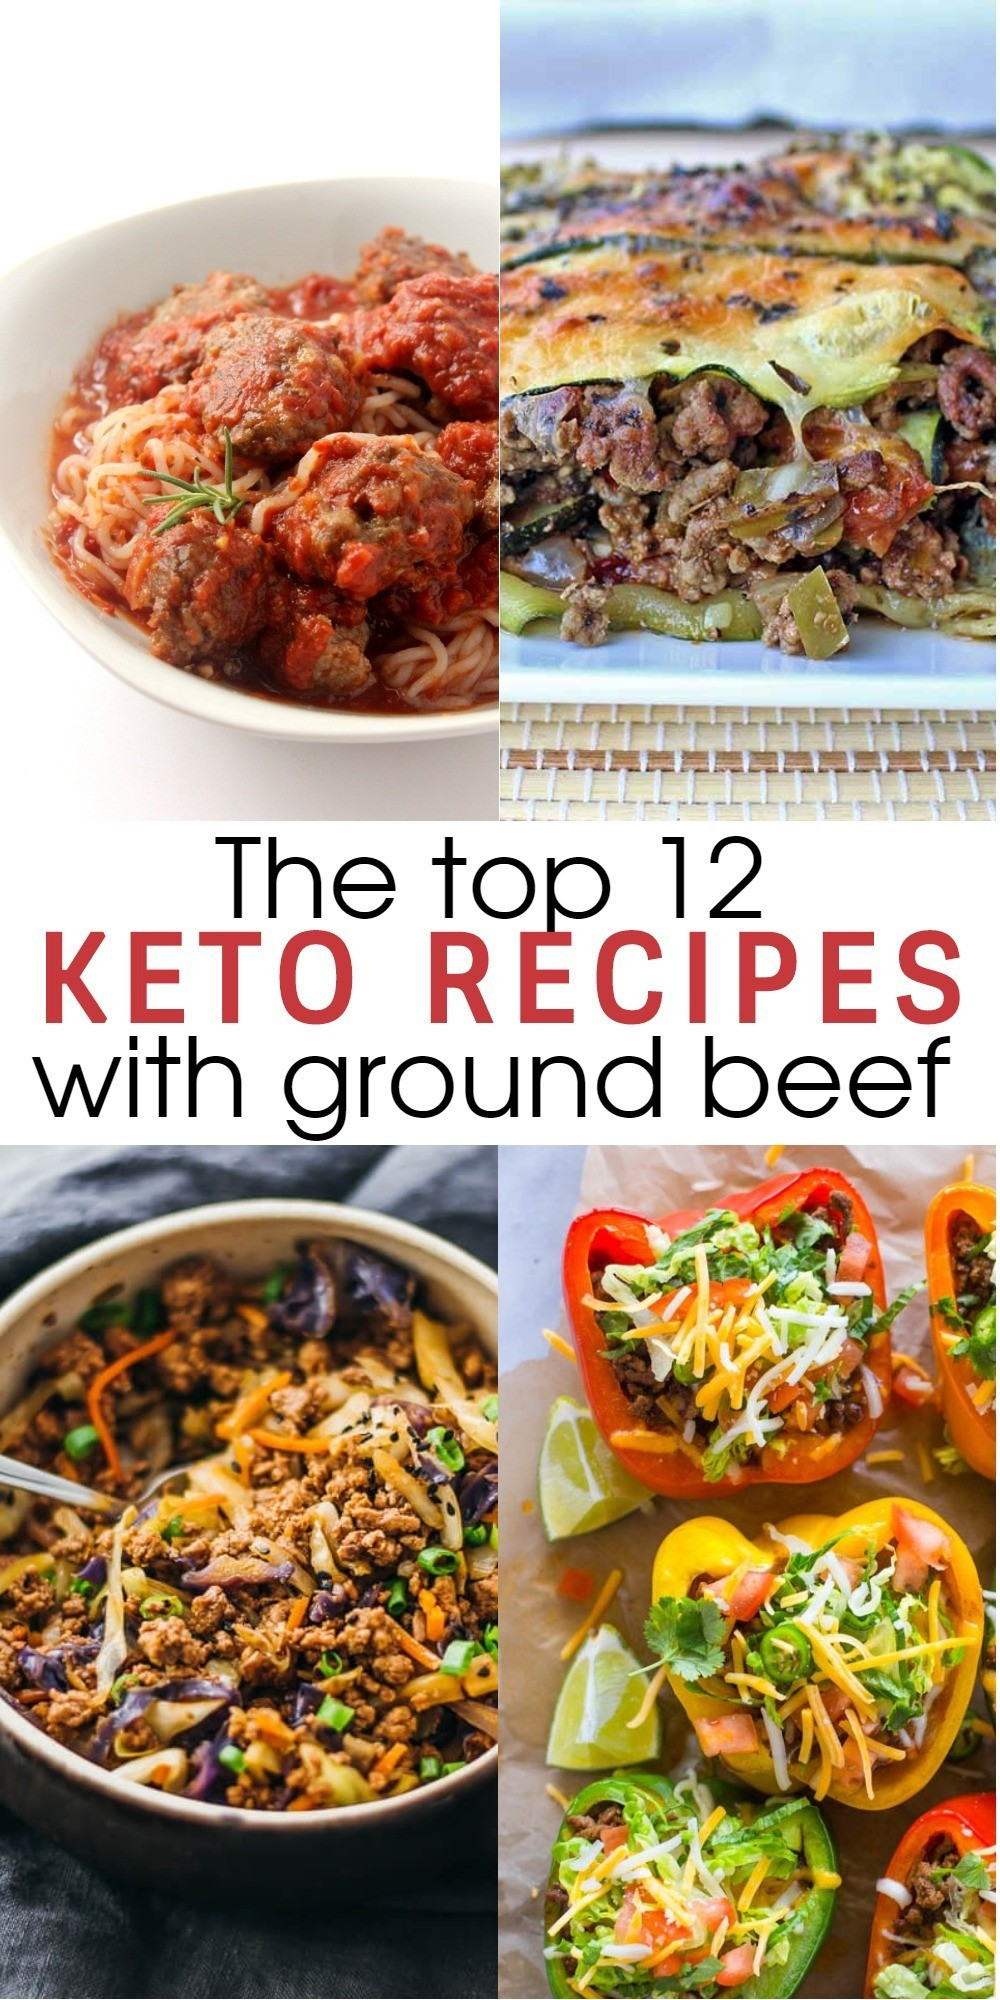 Ground Beef Keto Recipes For Dinner Videos
 12 Flavorful and Easy Keto Recipes With Ground Beef To Try